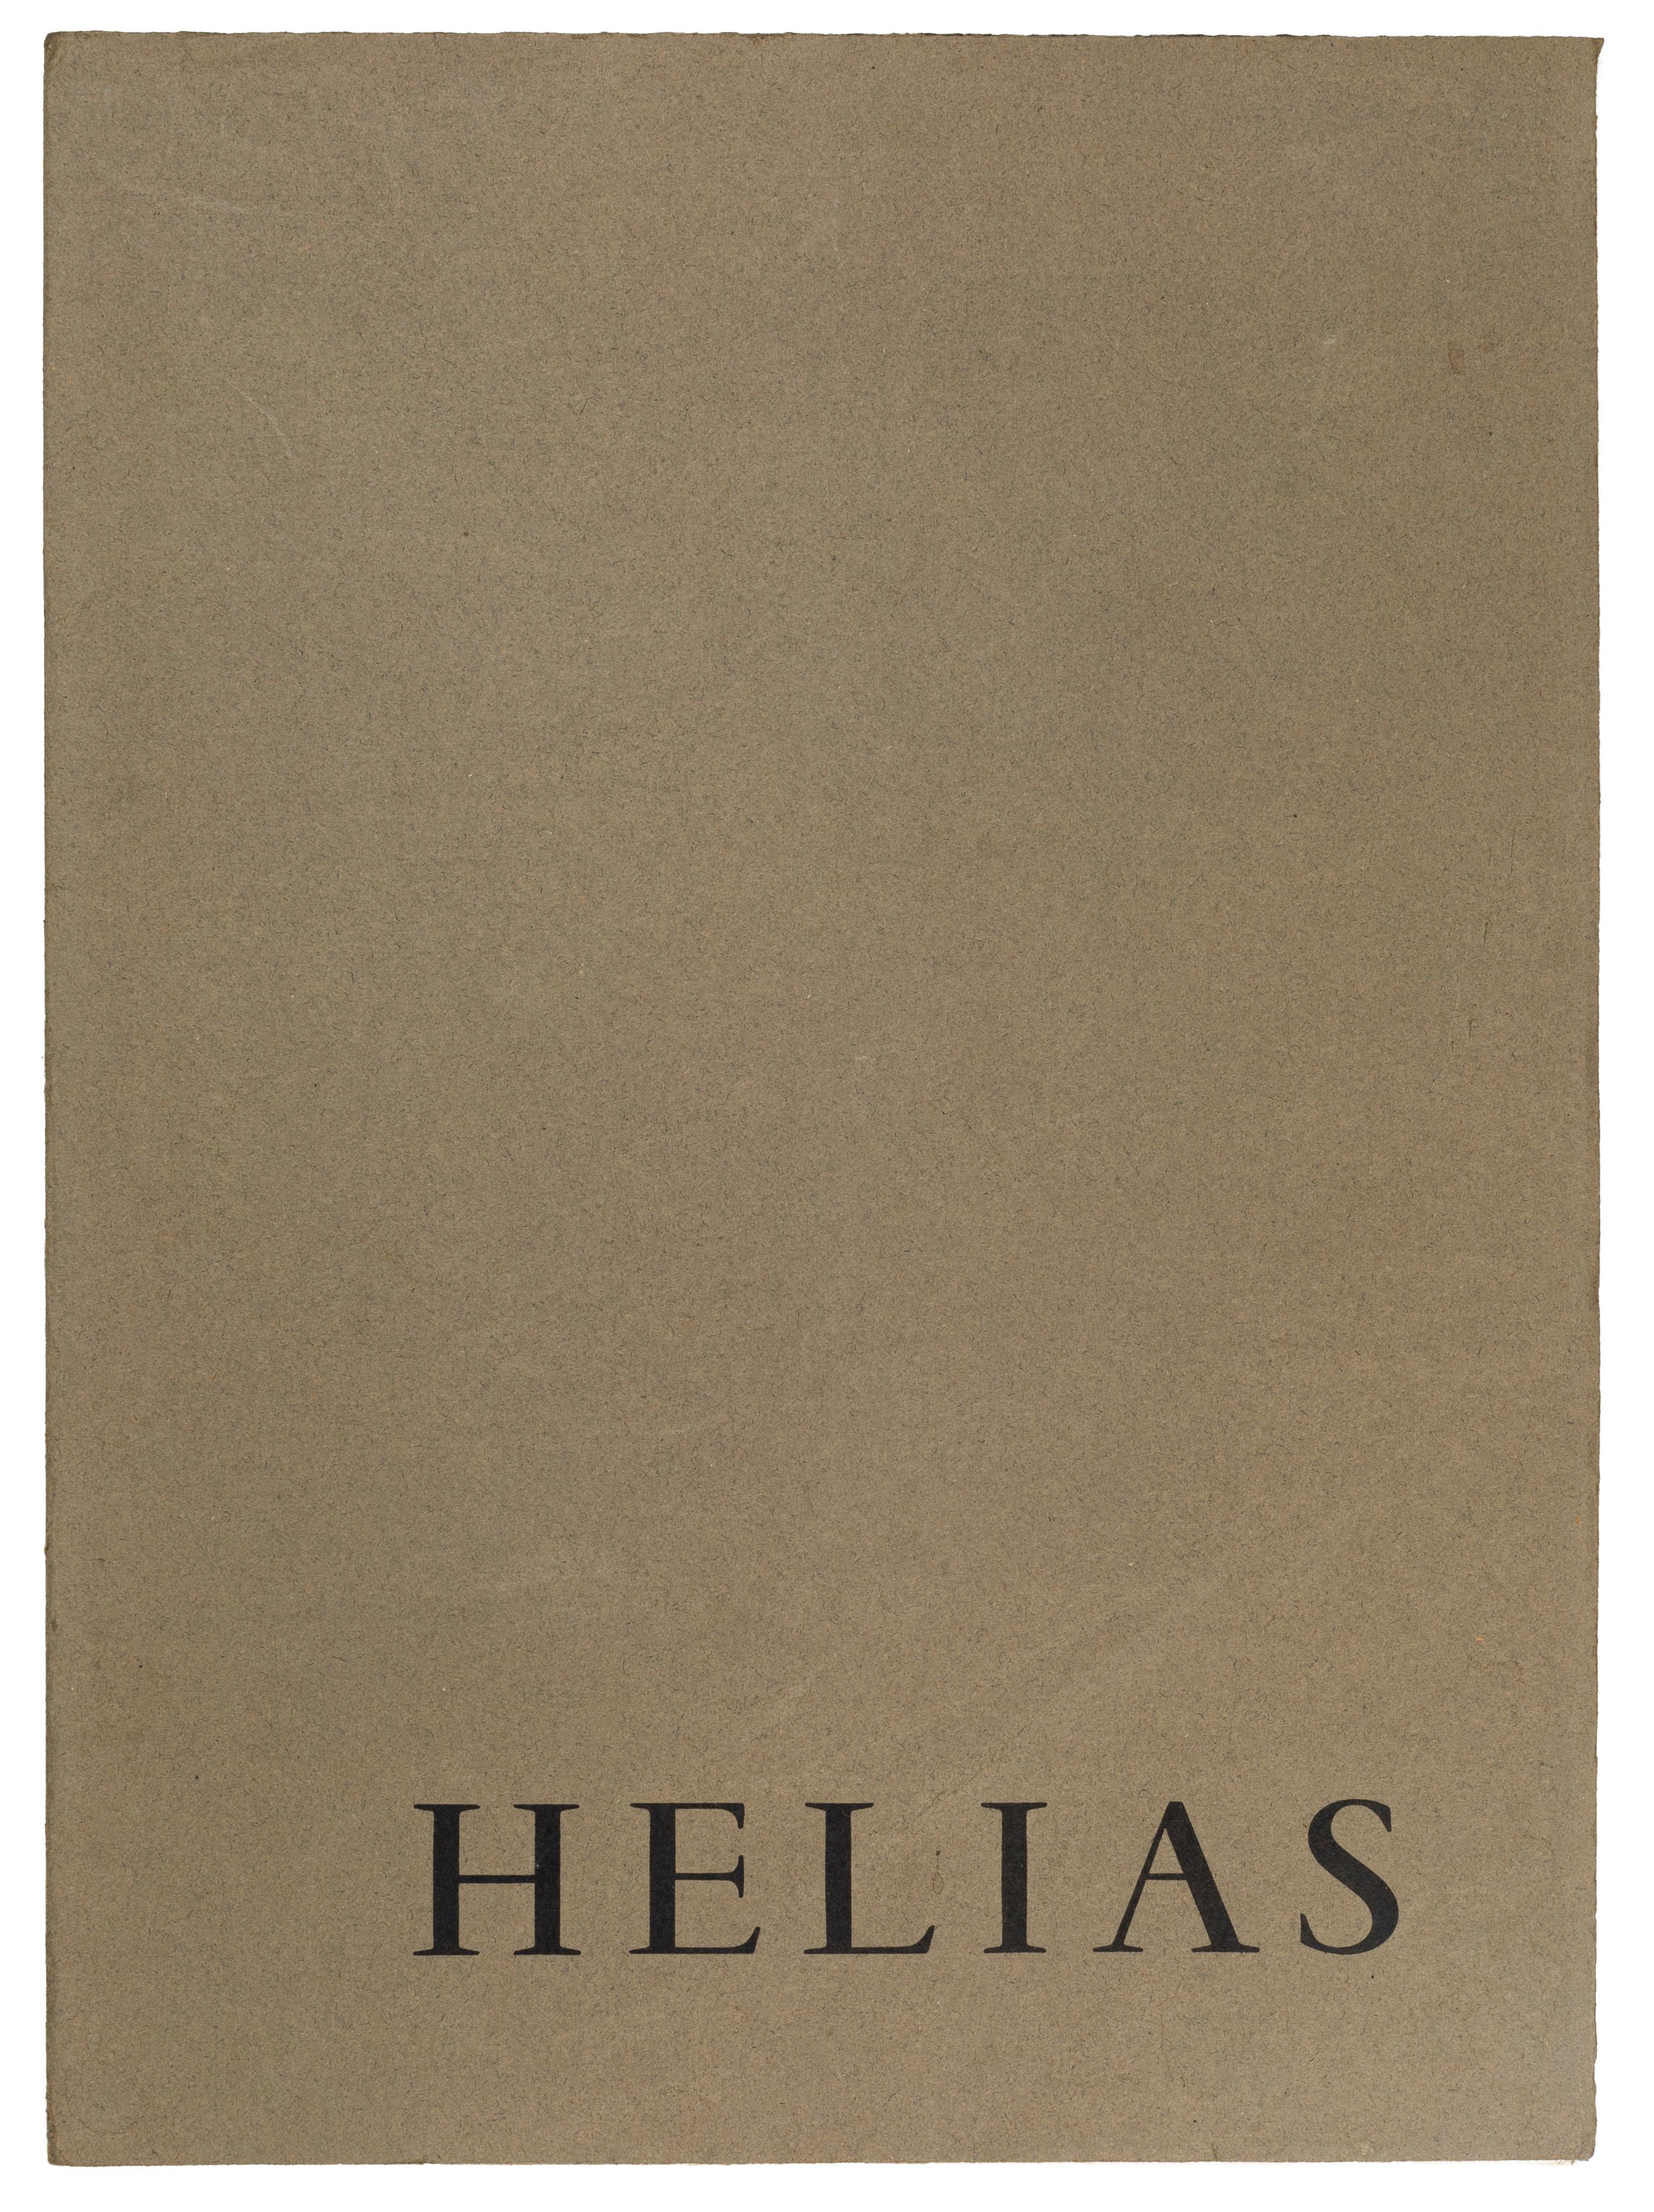 Image dimensions: 41 x 30.2 cm.

Helias is an original folding leaflet, with an original color lithograph on paper, realized in 1963 in occasion of the exhibition hold at the Parisian Galerie du Damier.

This abstract composition is signed and dated